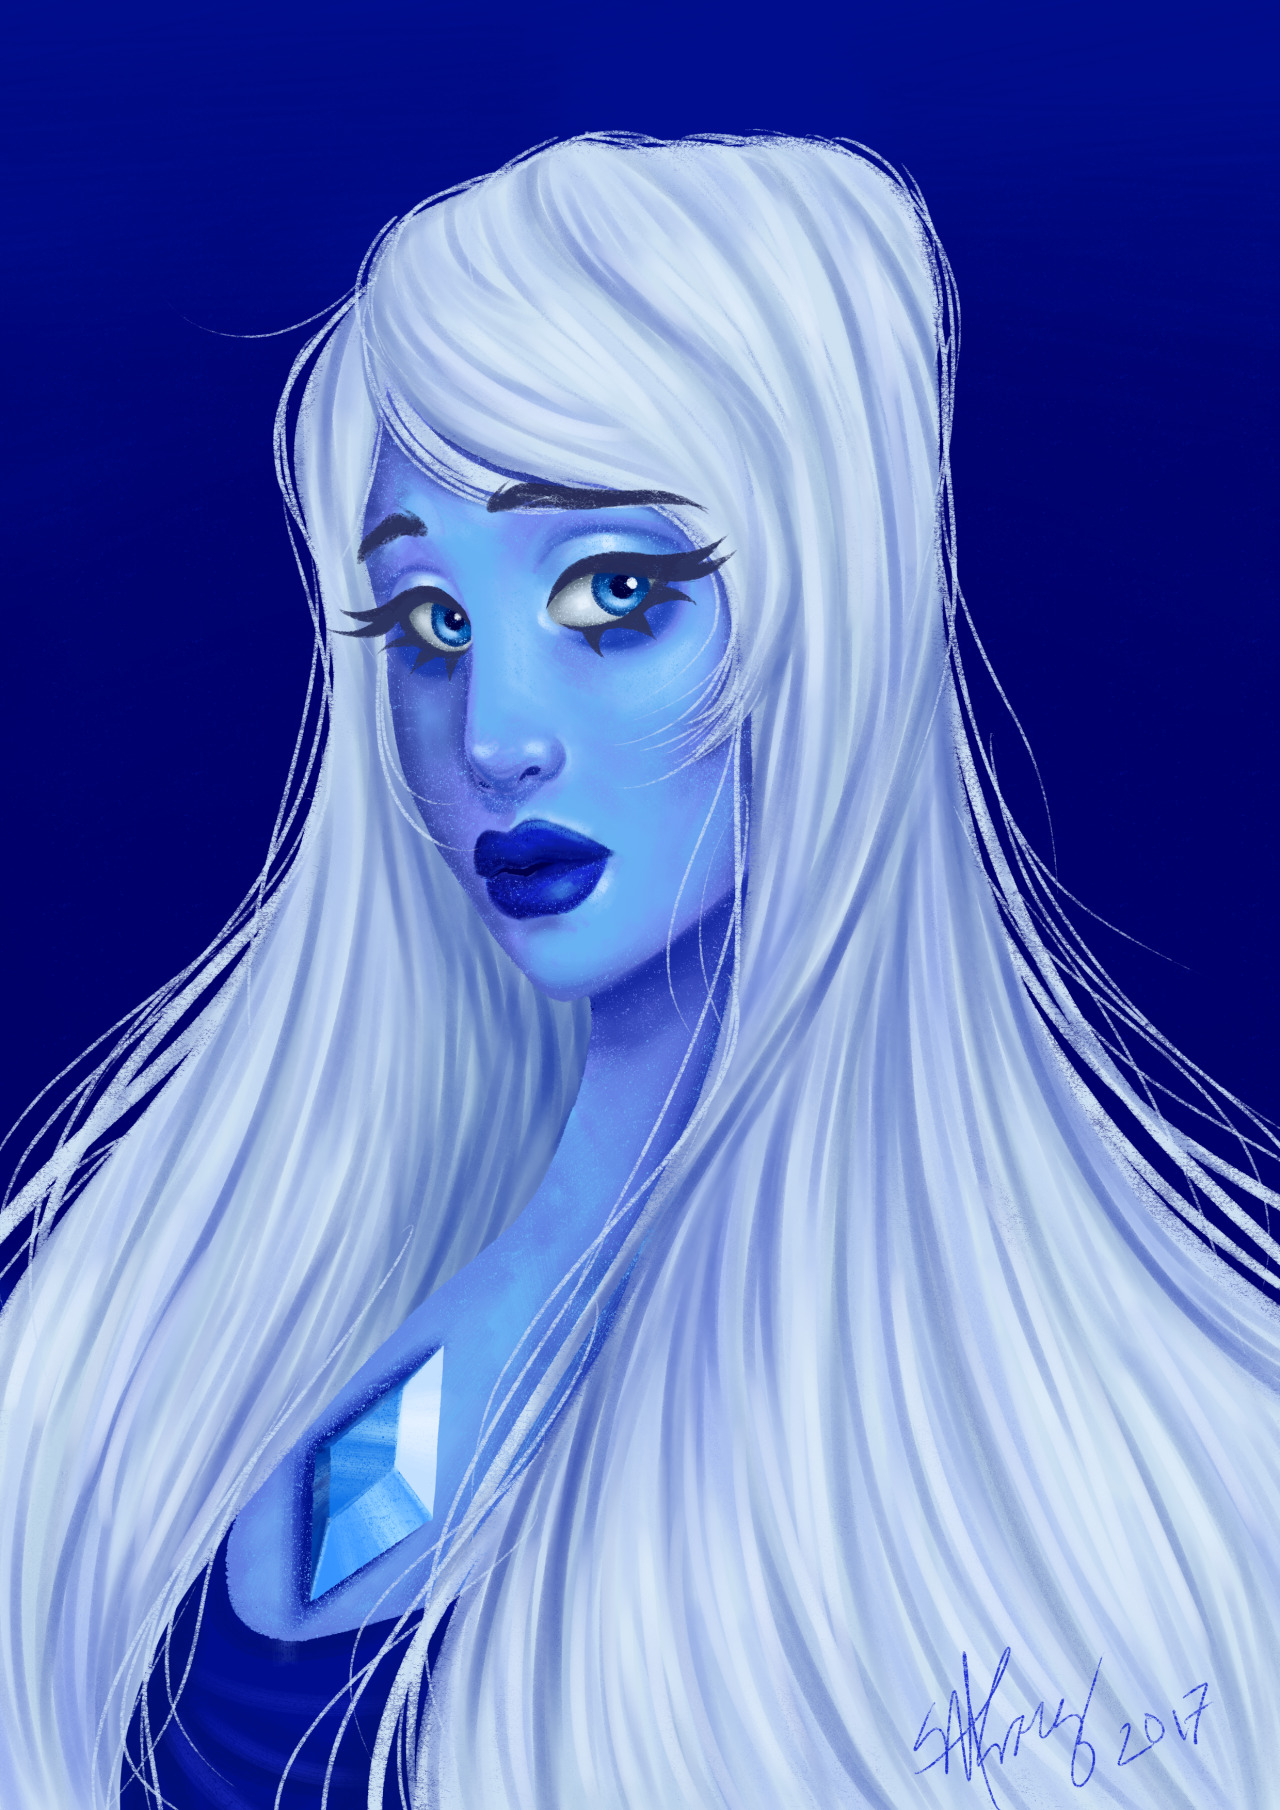 Blue Diamond fan art because those leaked episodes gave me life.